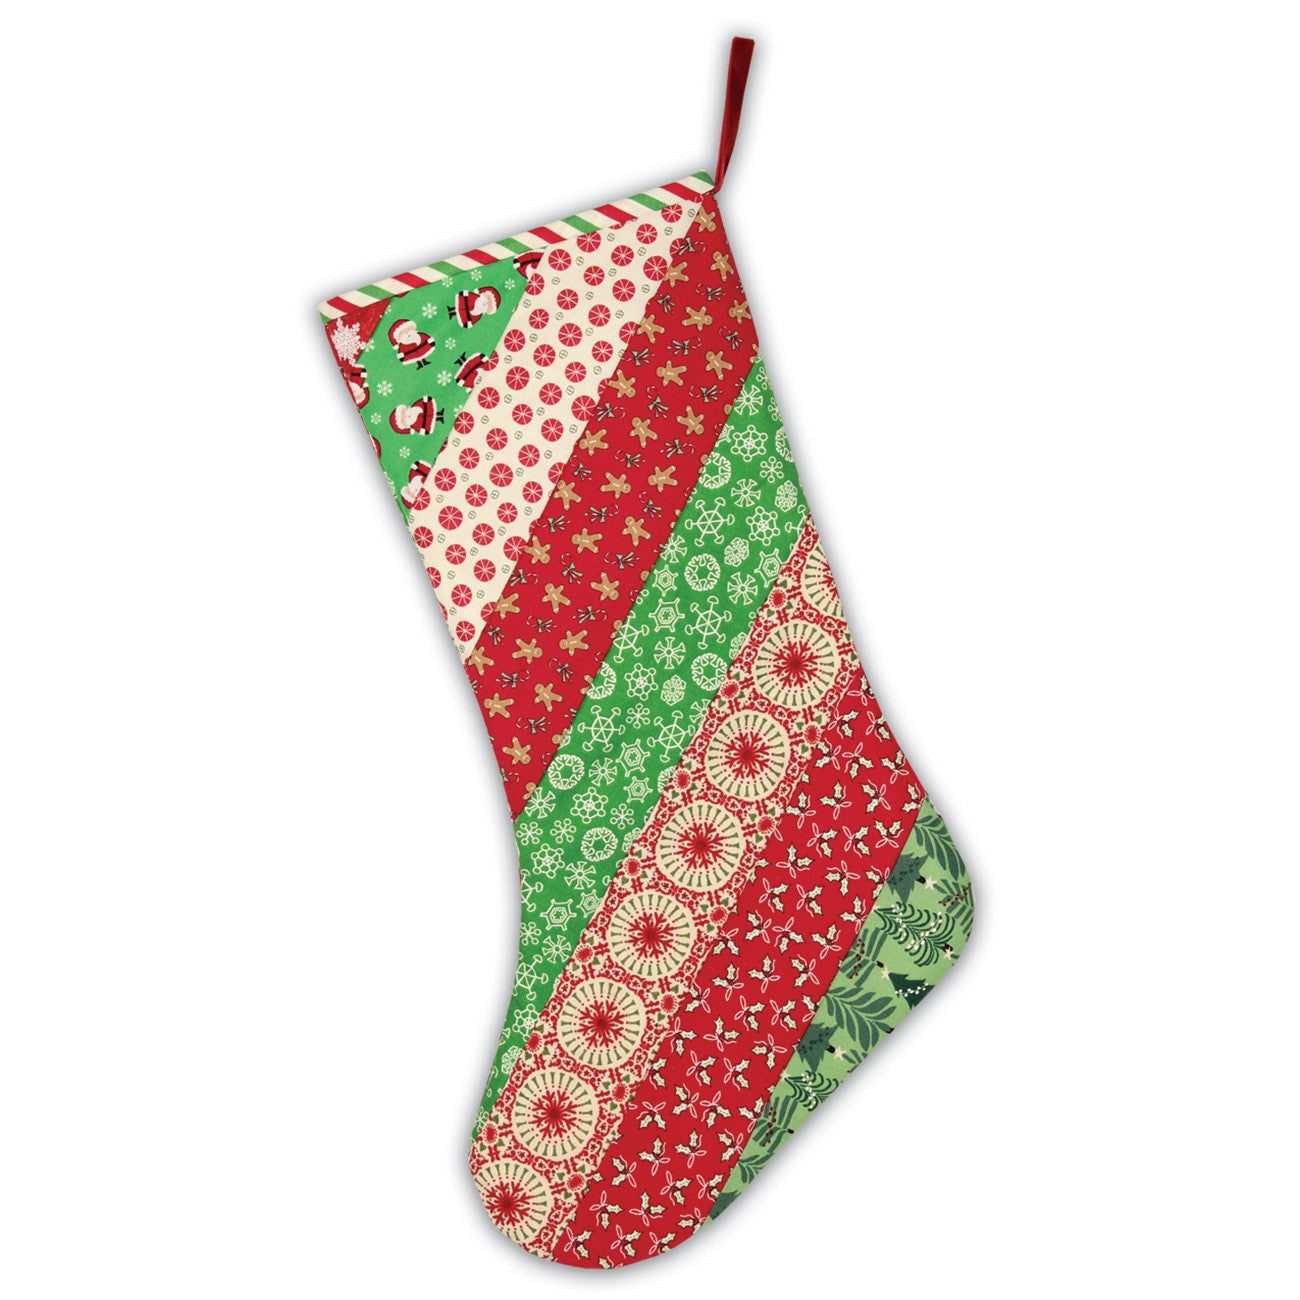 June Tailor | Quilt As You Go Holiday Stocking